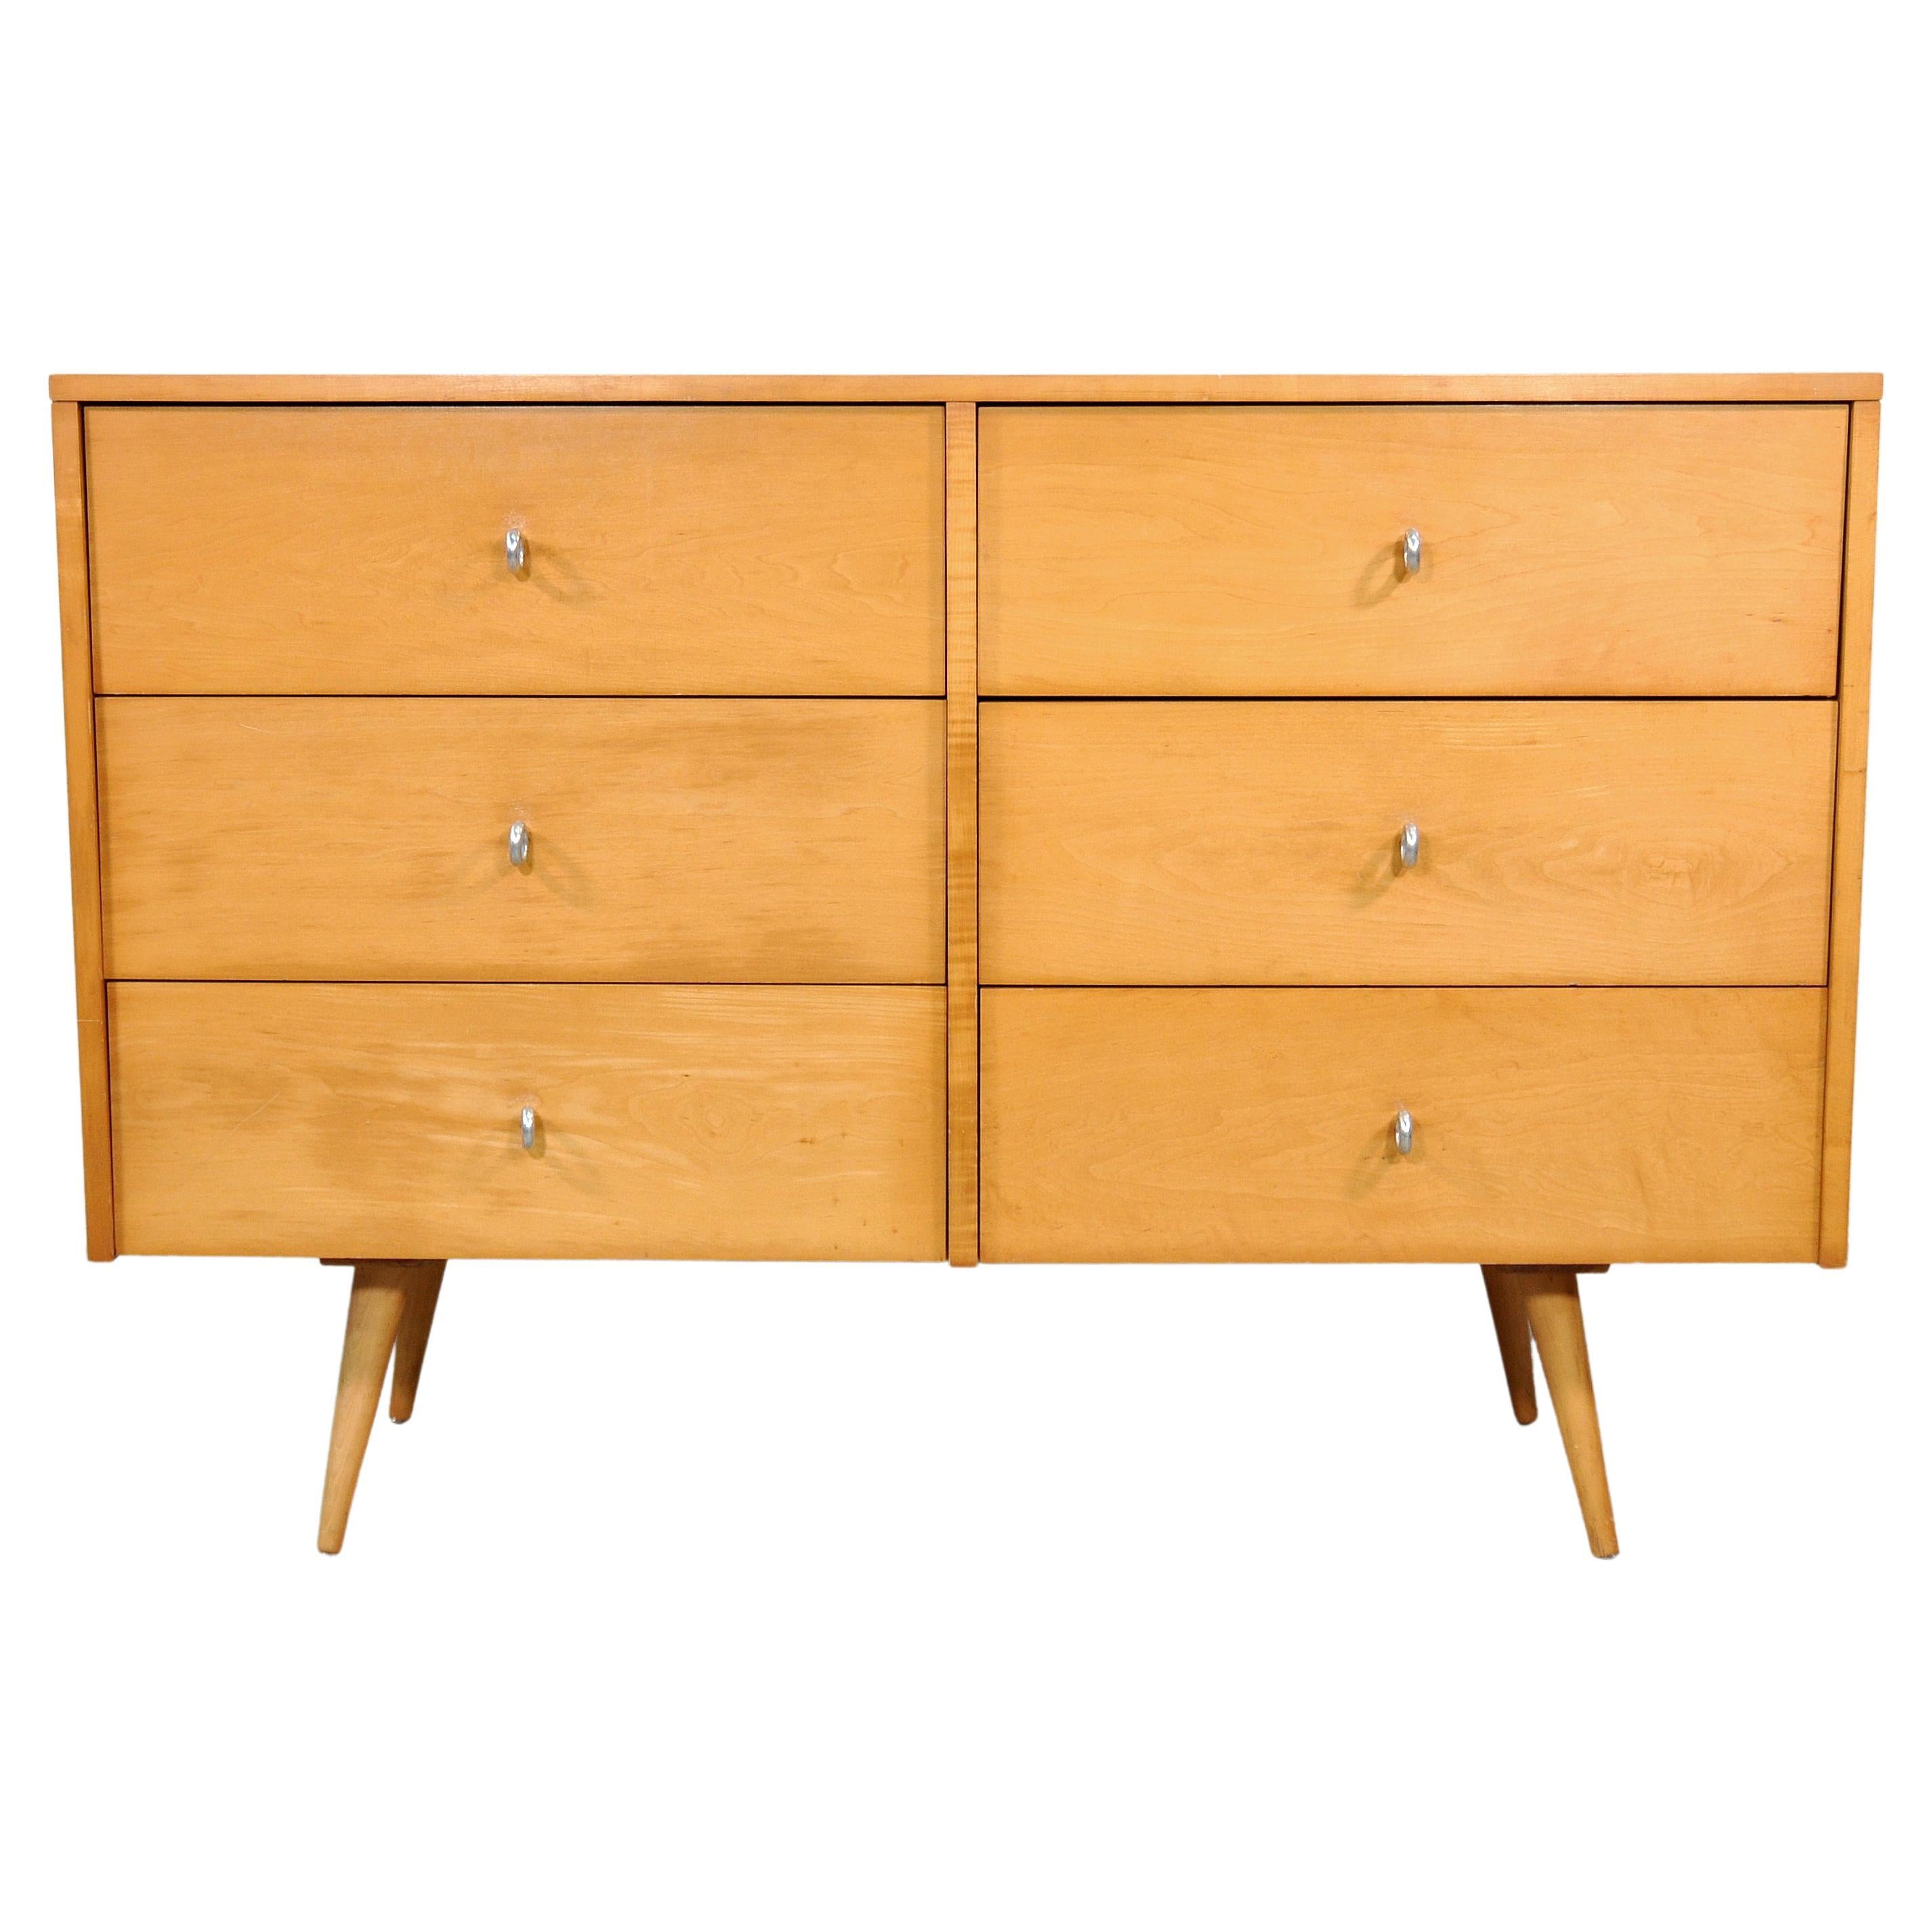 Paul McCobb Maple Double Dresser Planner Group by Winchendon Furniture, 1950s For Sale